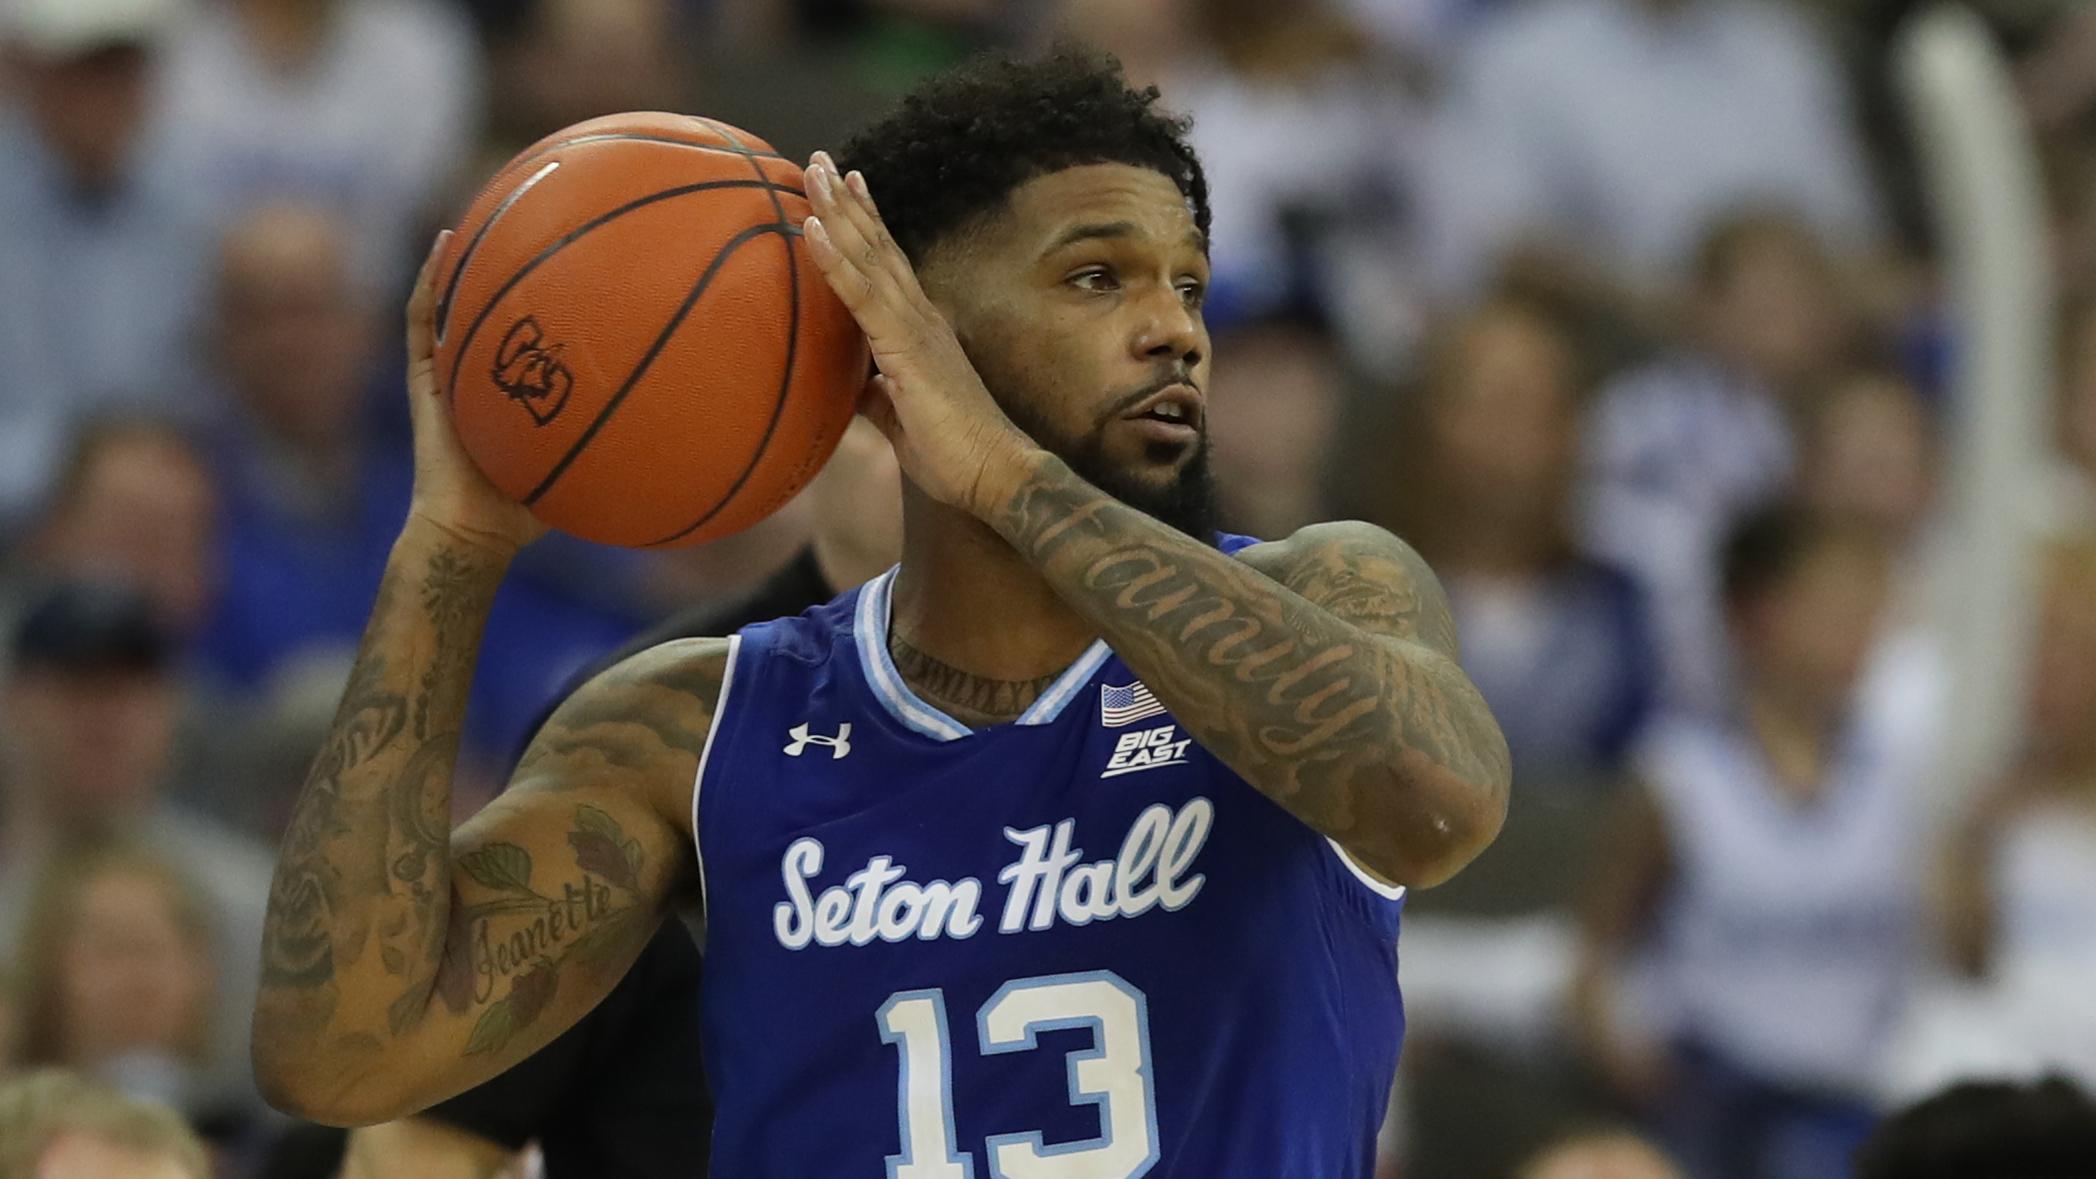 Mar 7, 2020; Omaha, Nebraska, USA; Seton Hall Pirates guard Myles Powell (13) looks to pass in their game against the Creighton Bluejays at CHI Health Center Omaha. Creighton beat Seton Hall 77 to 60. / Reese Strickland-USA TODAY Sports